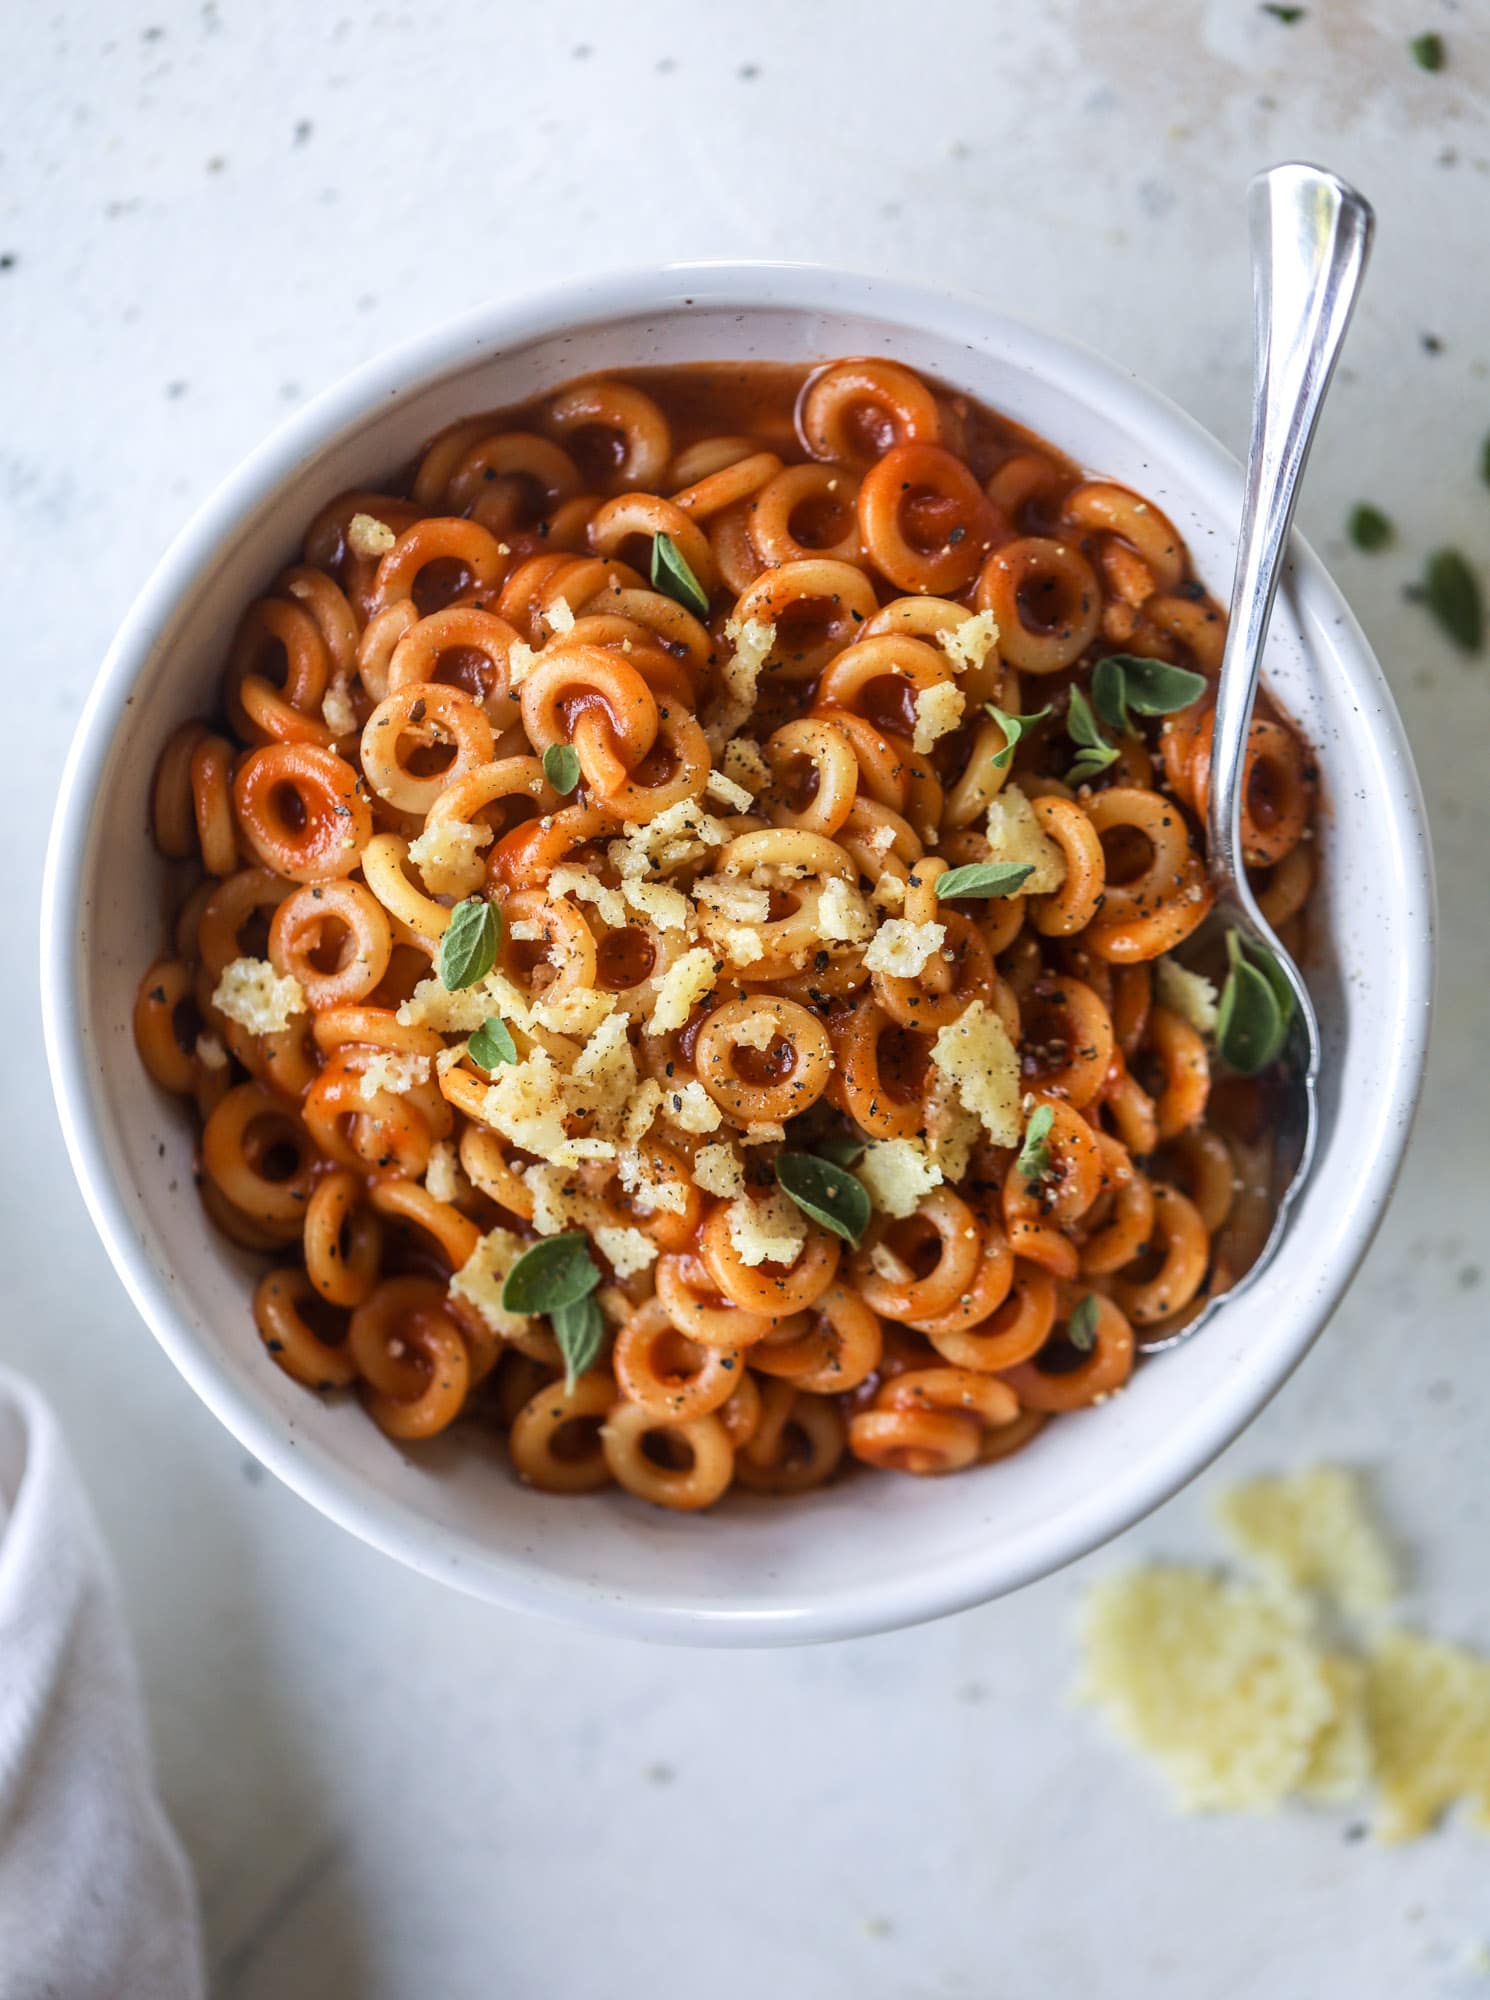 These homemade spaghettios are the ultimate comfort food! They come together in less than 30 minutes, are super easy and flavorful and topped with crispy crunchy manchego cheese that takes the taste over the top! I howsweeteats.com #homemade #spaghettios